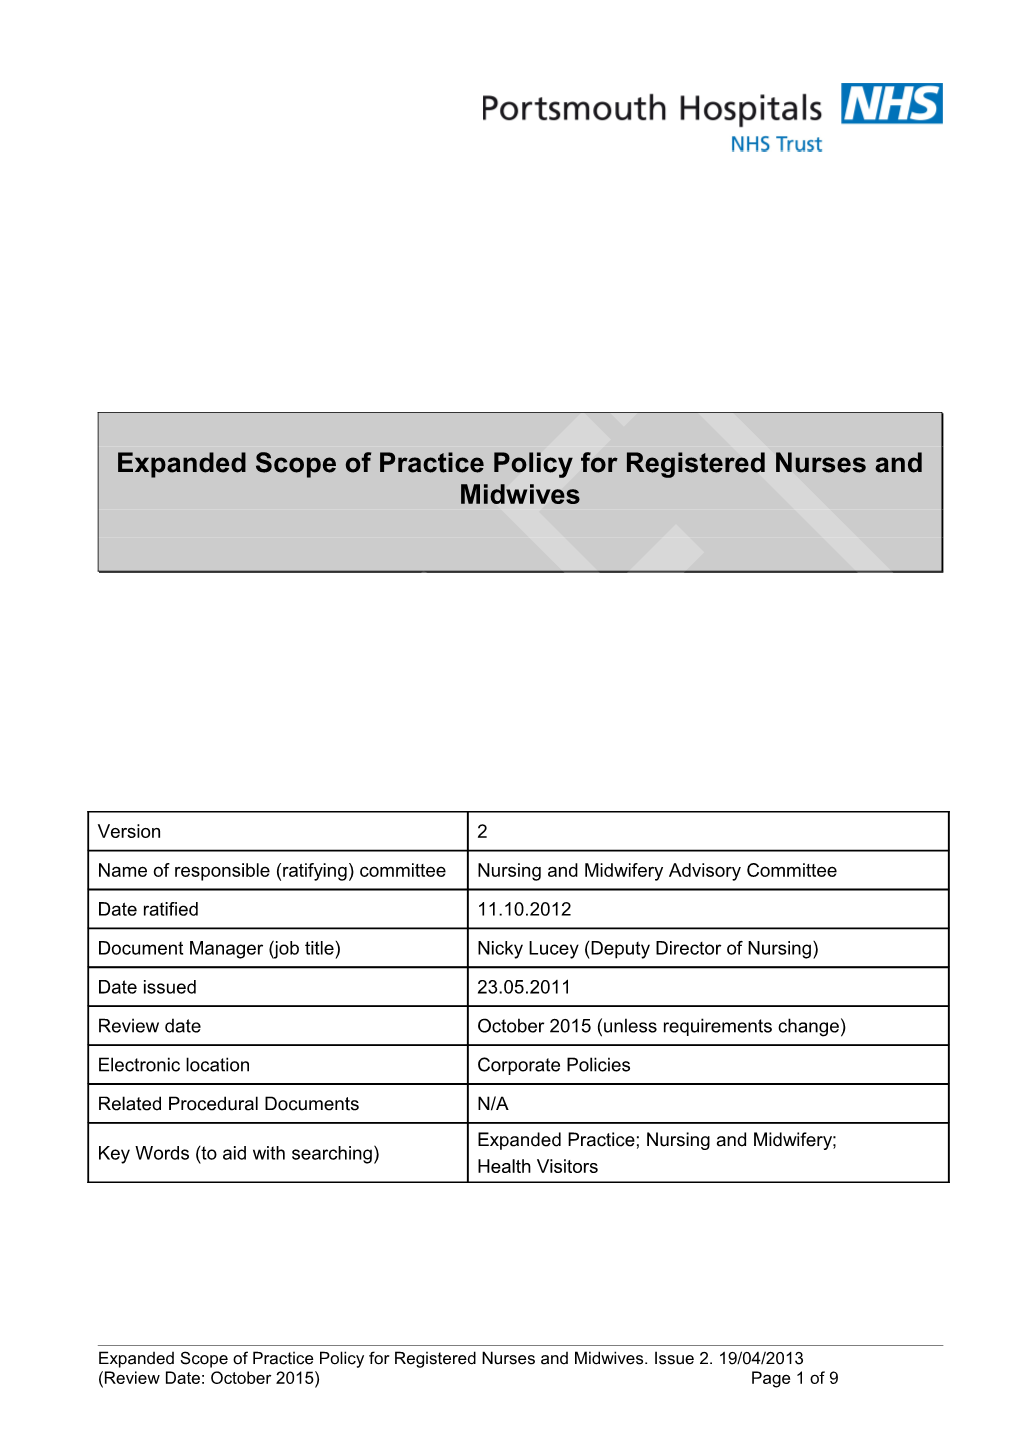 Expanded Scope of Practice Policy for Registered Nurses and Midwives